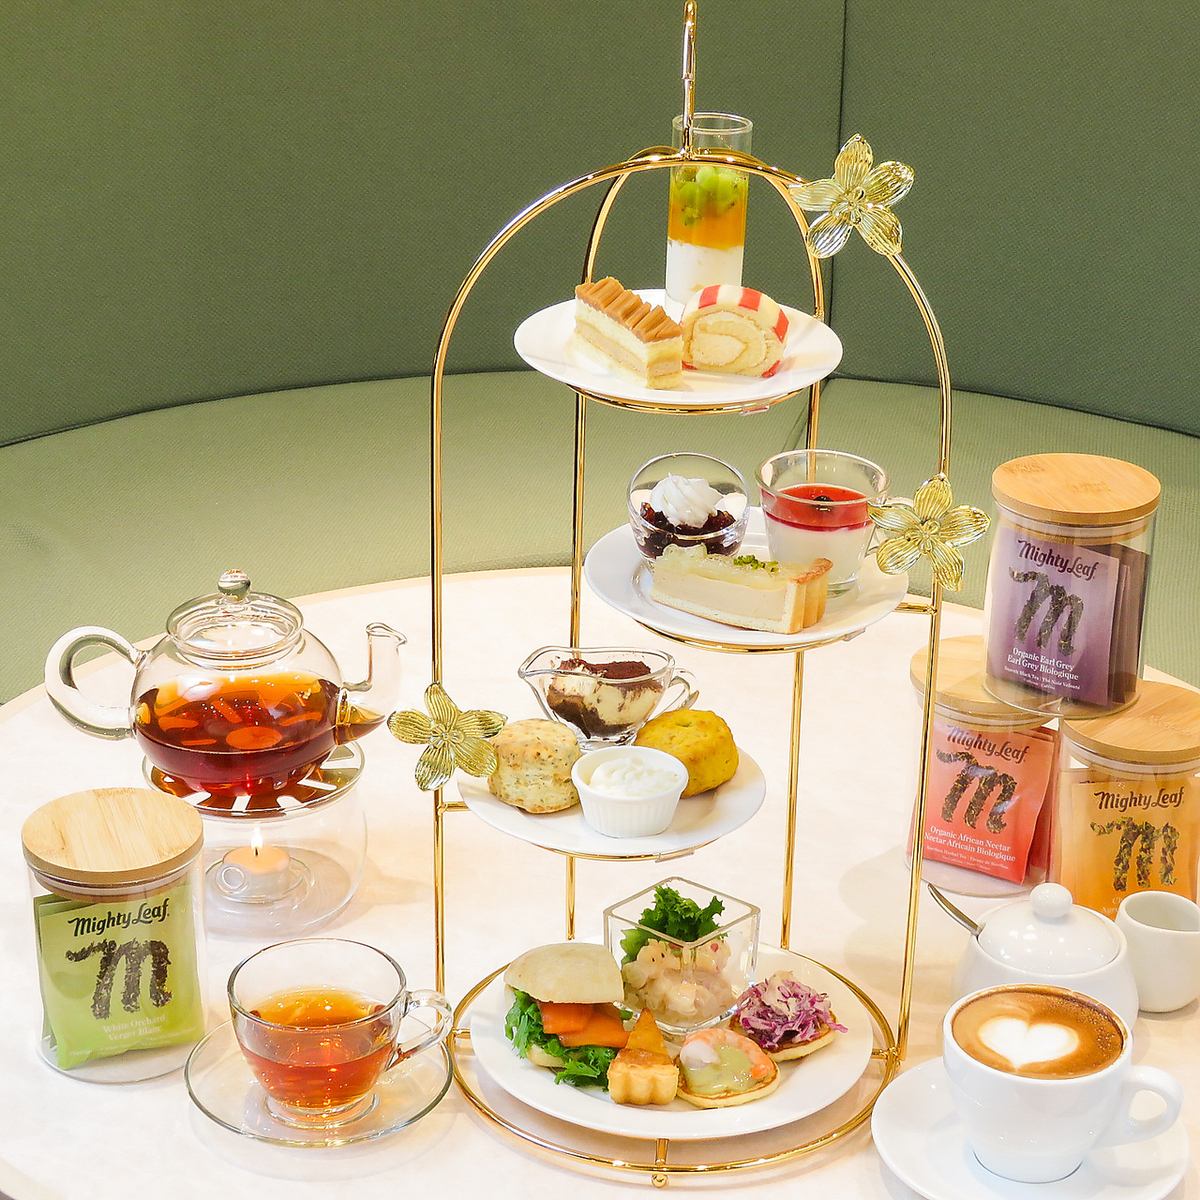 Enjoy a relaxing afternoon in Ginza with the Tenshodo Afternoon Tea Set.